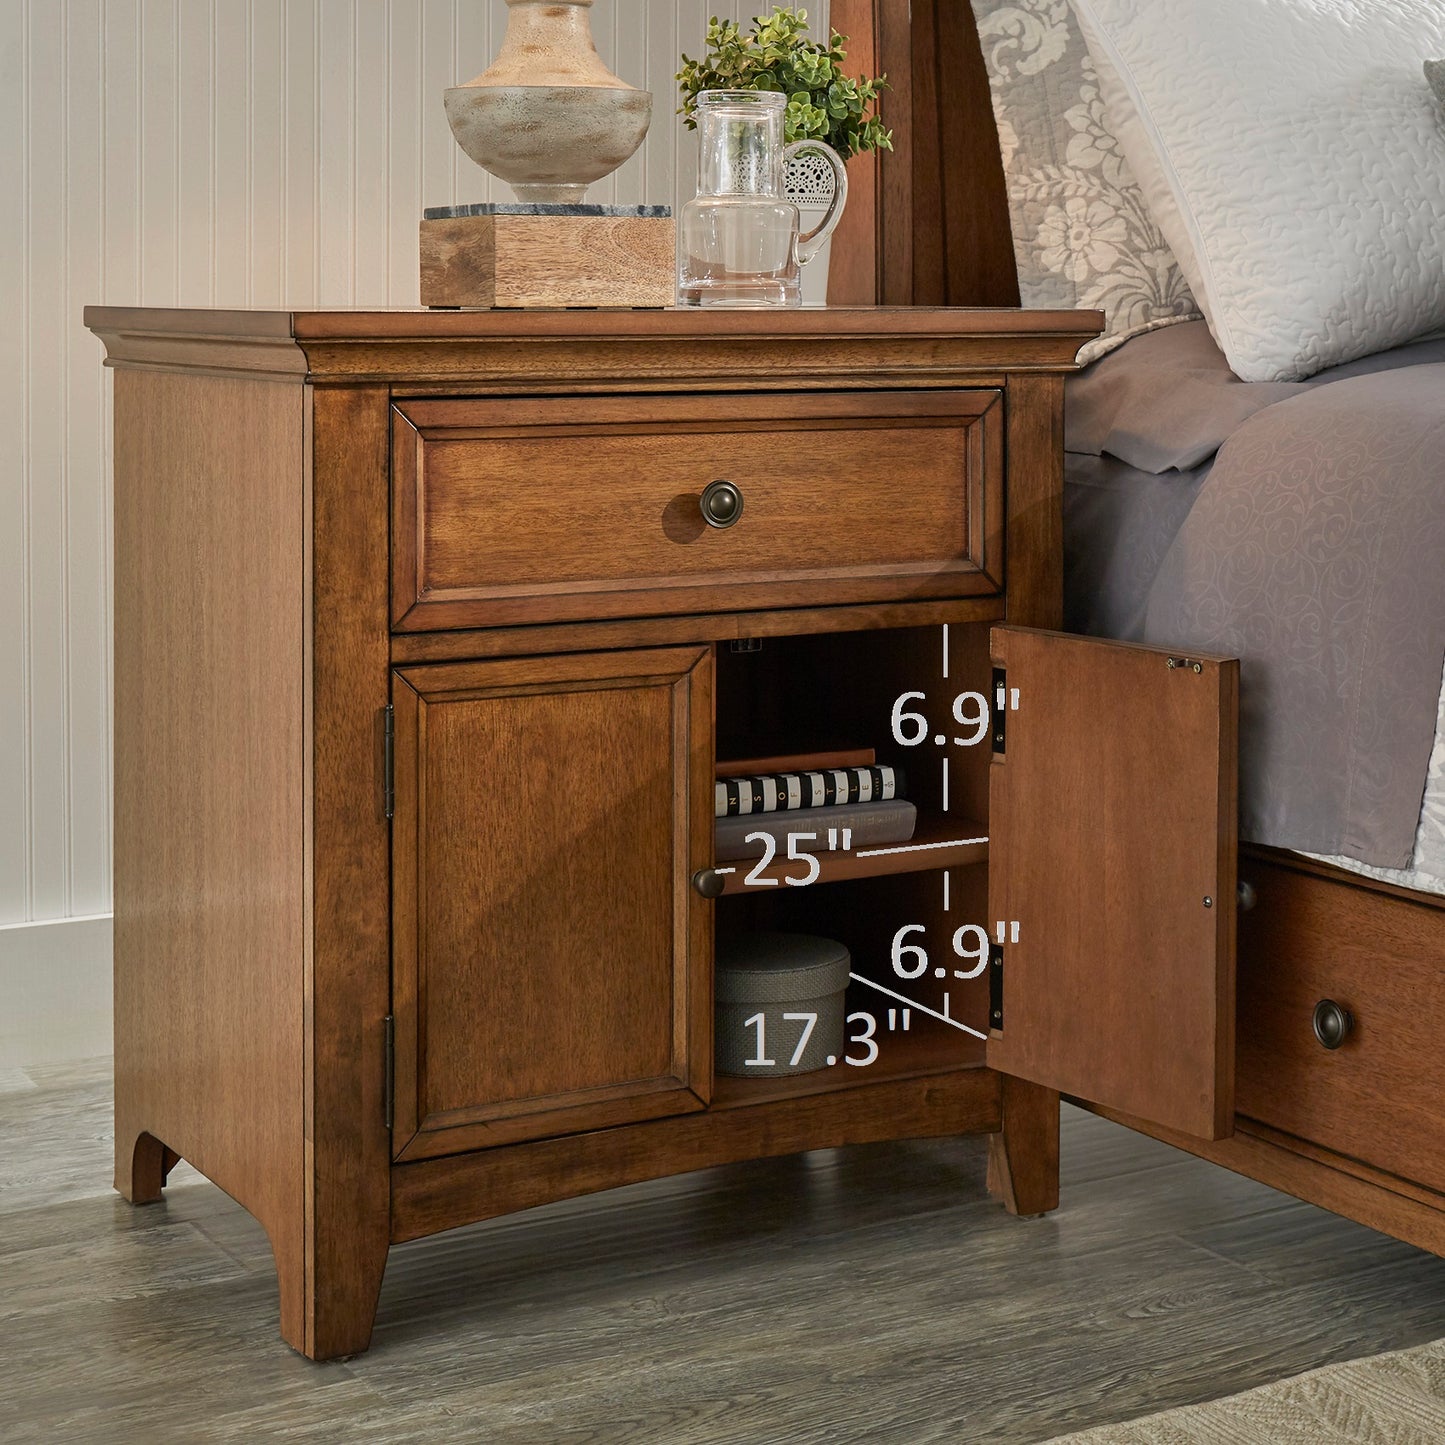 1-Drawer Wood Cupboard Nightstand with Charging Station - Oak